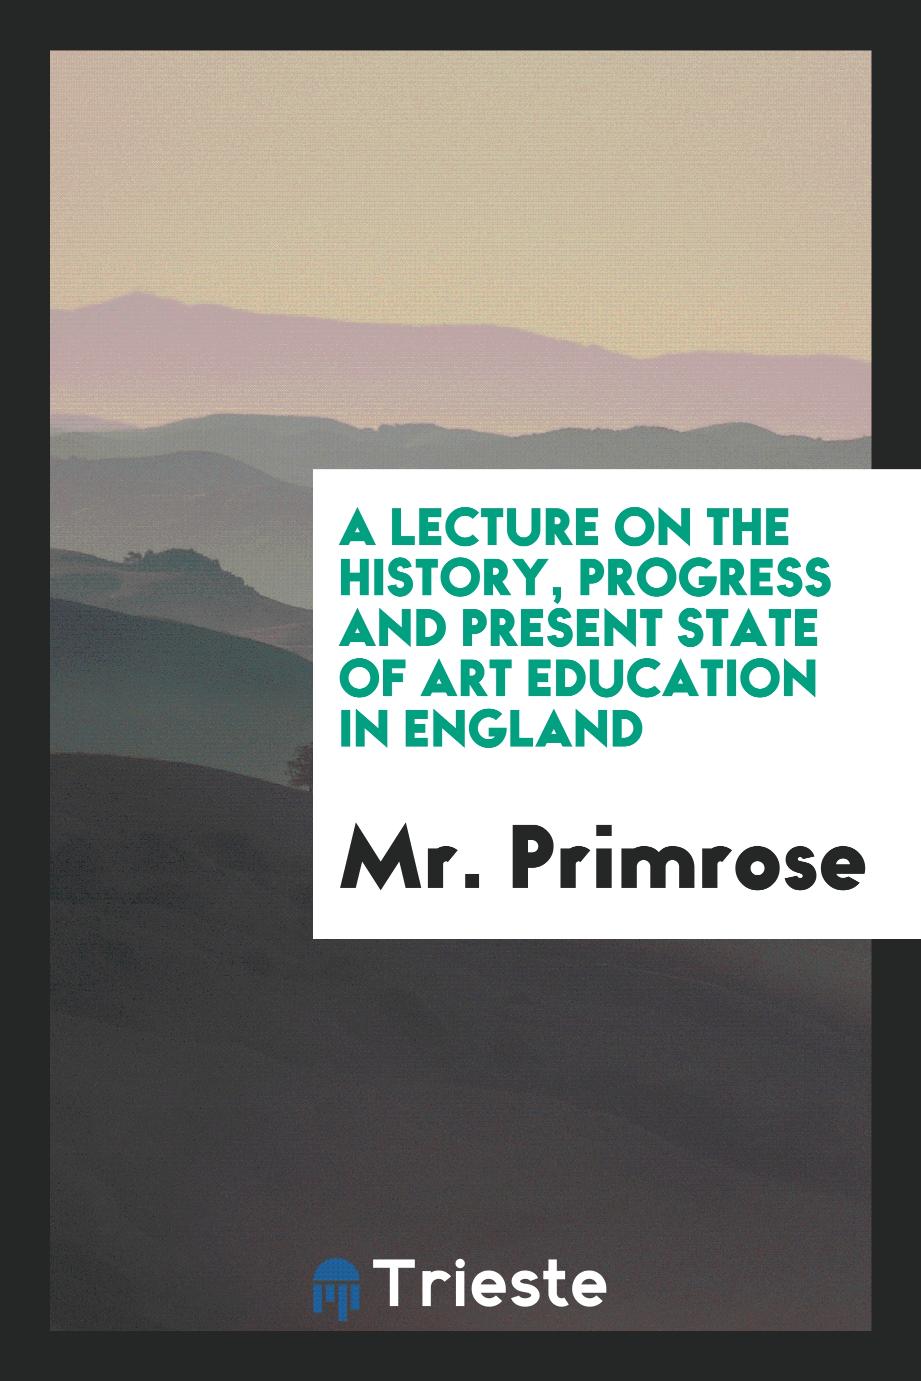 A lecture on the history, progress and present state of art education in England